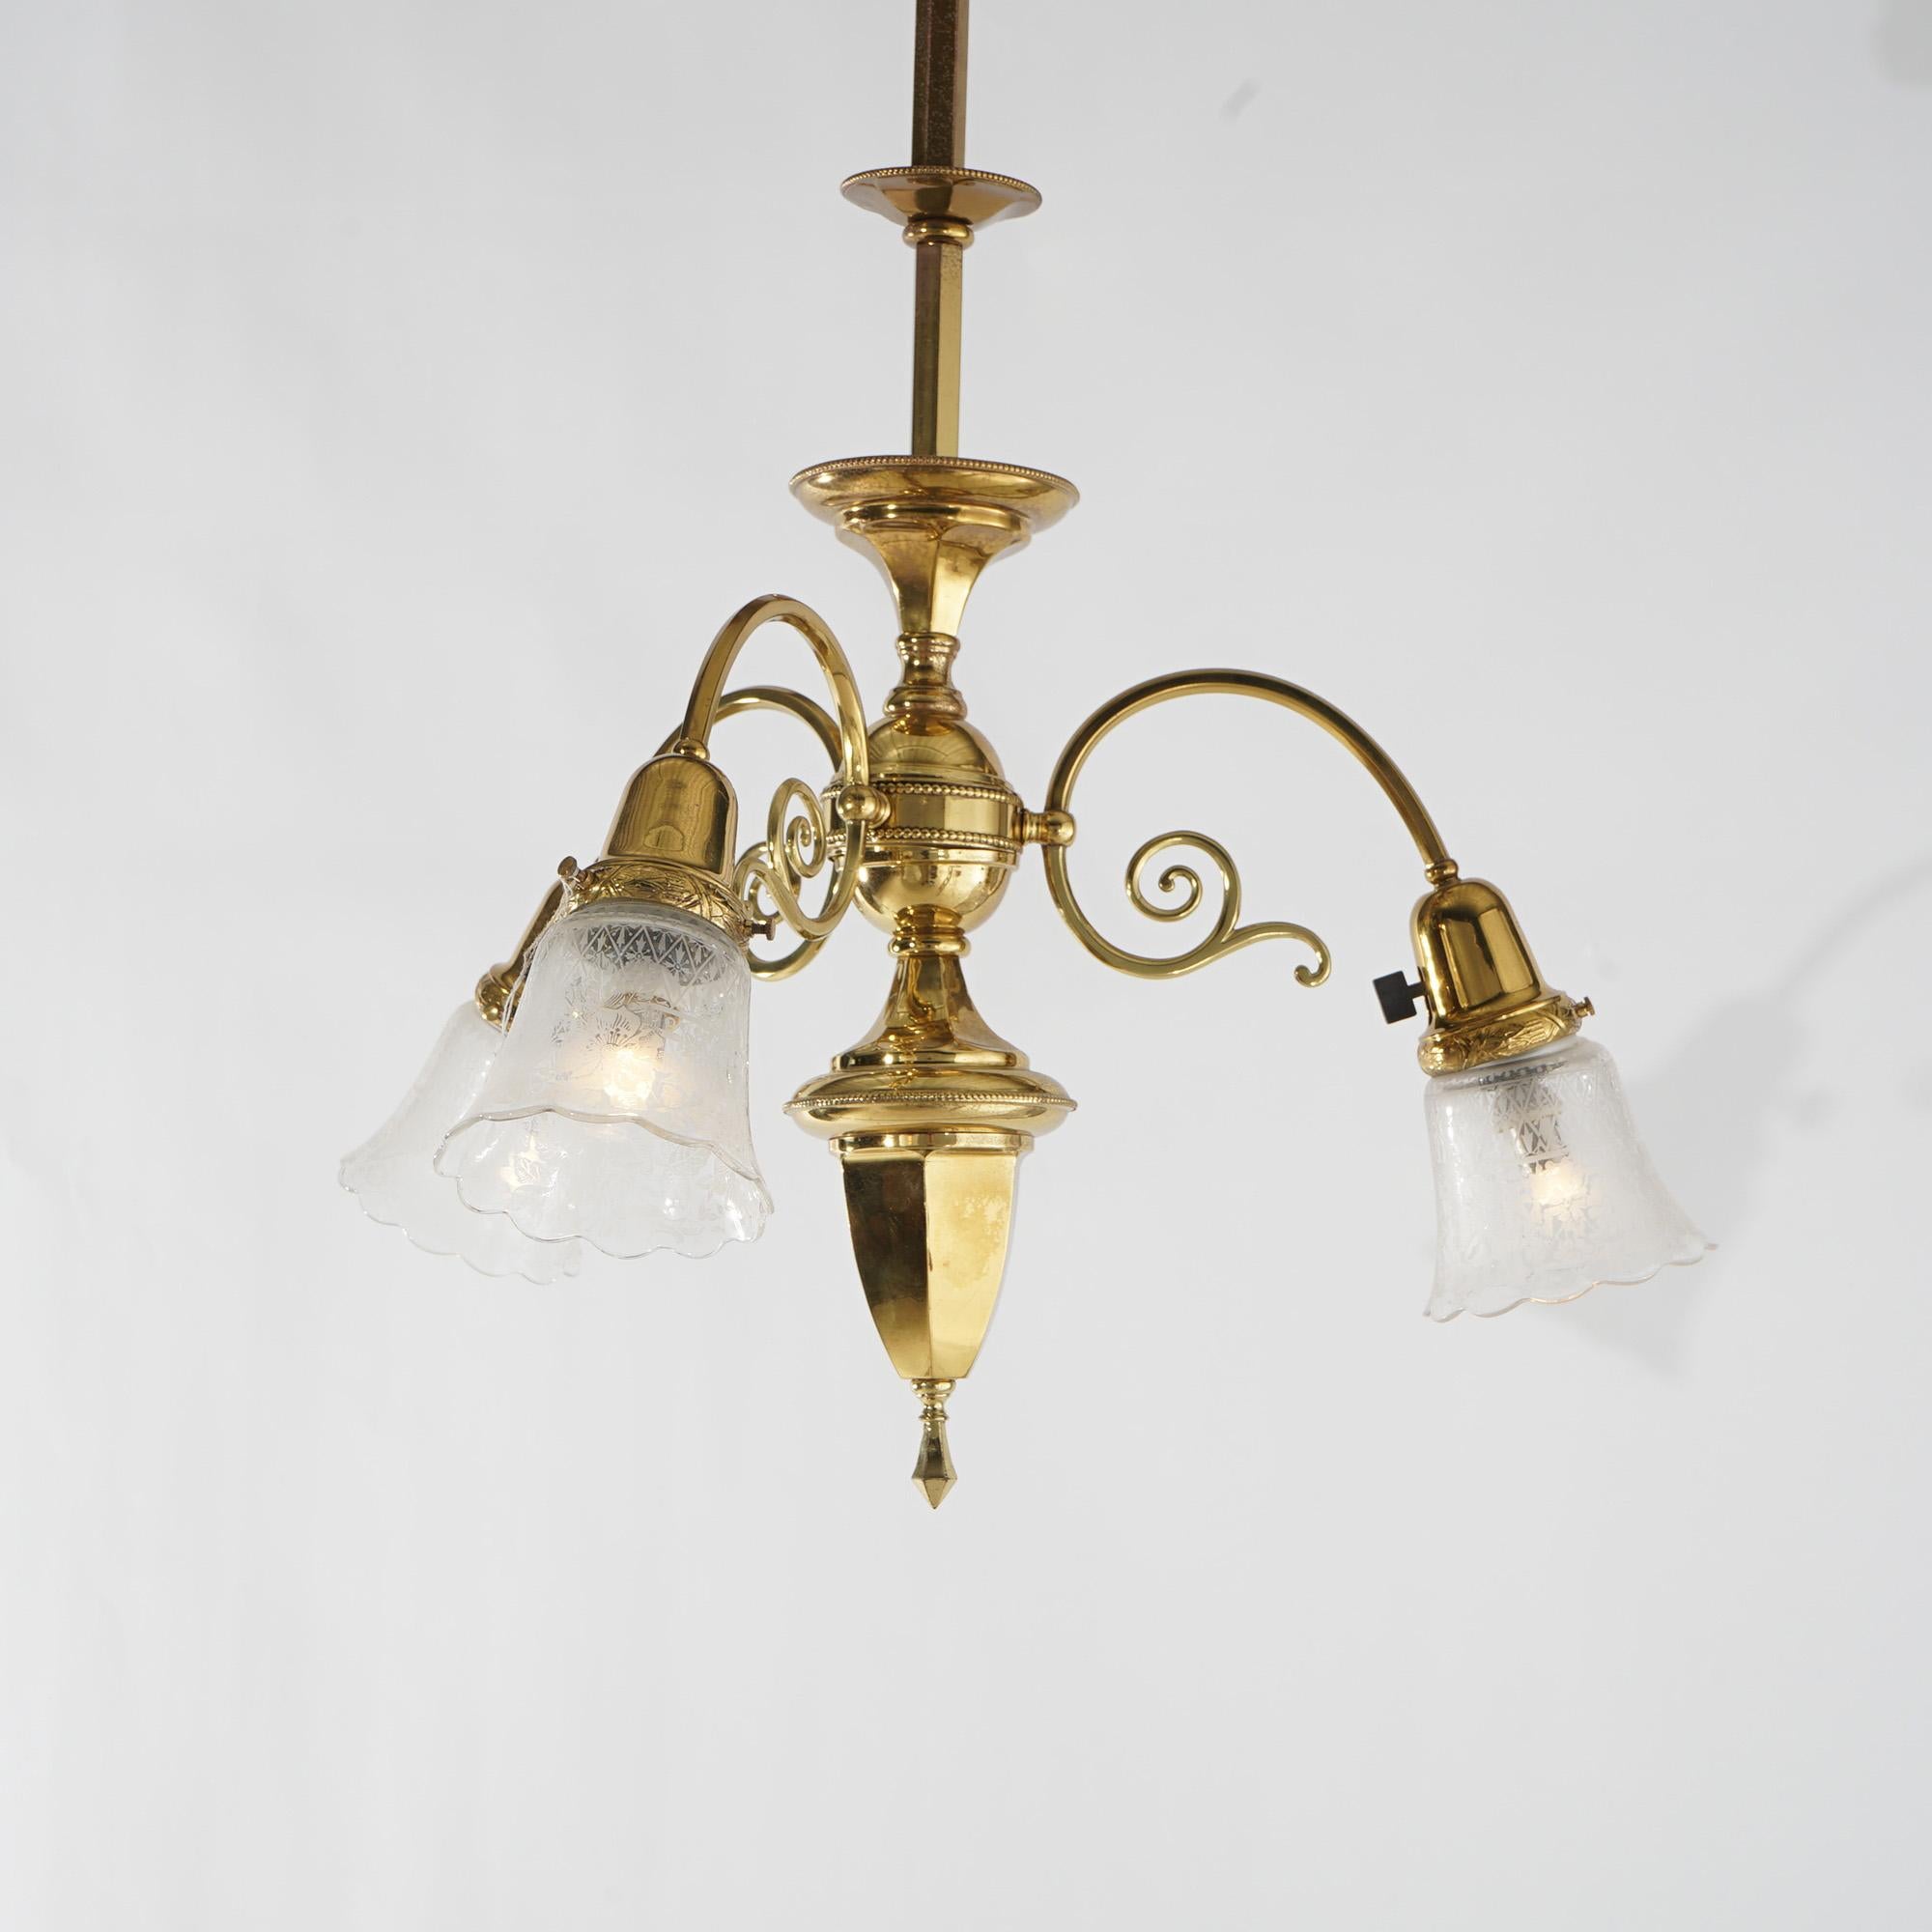 Antique Scrolled Brass Three Light Hanging Fixture with Faceted Font, Circa 1920

Measures- 30.5''H x 21''W x 21''D